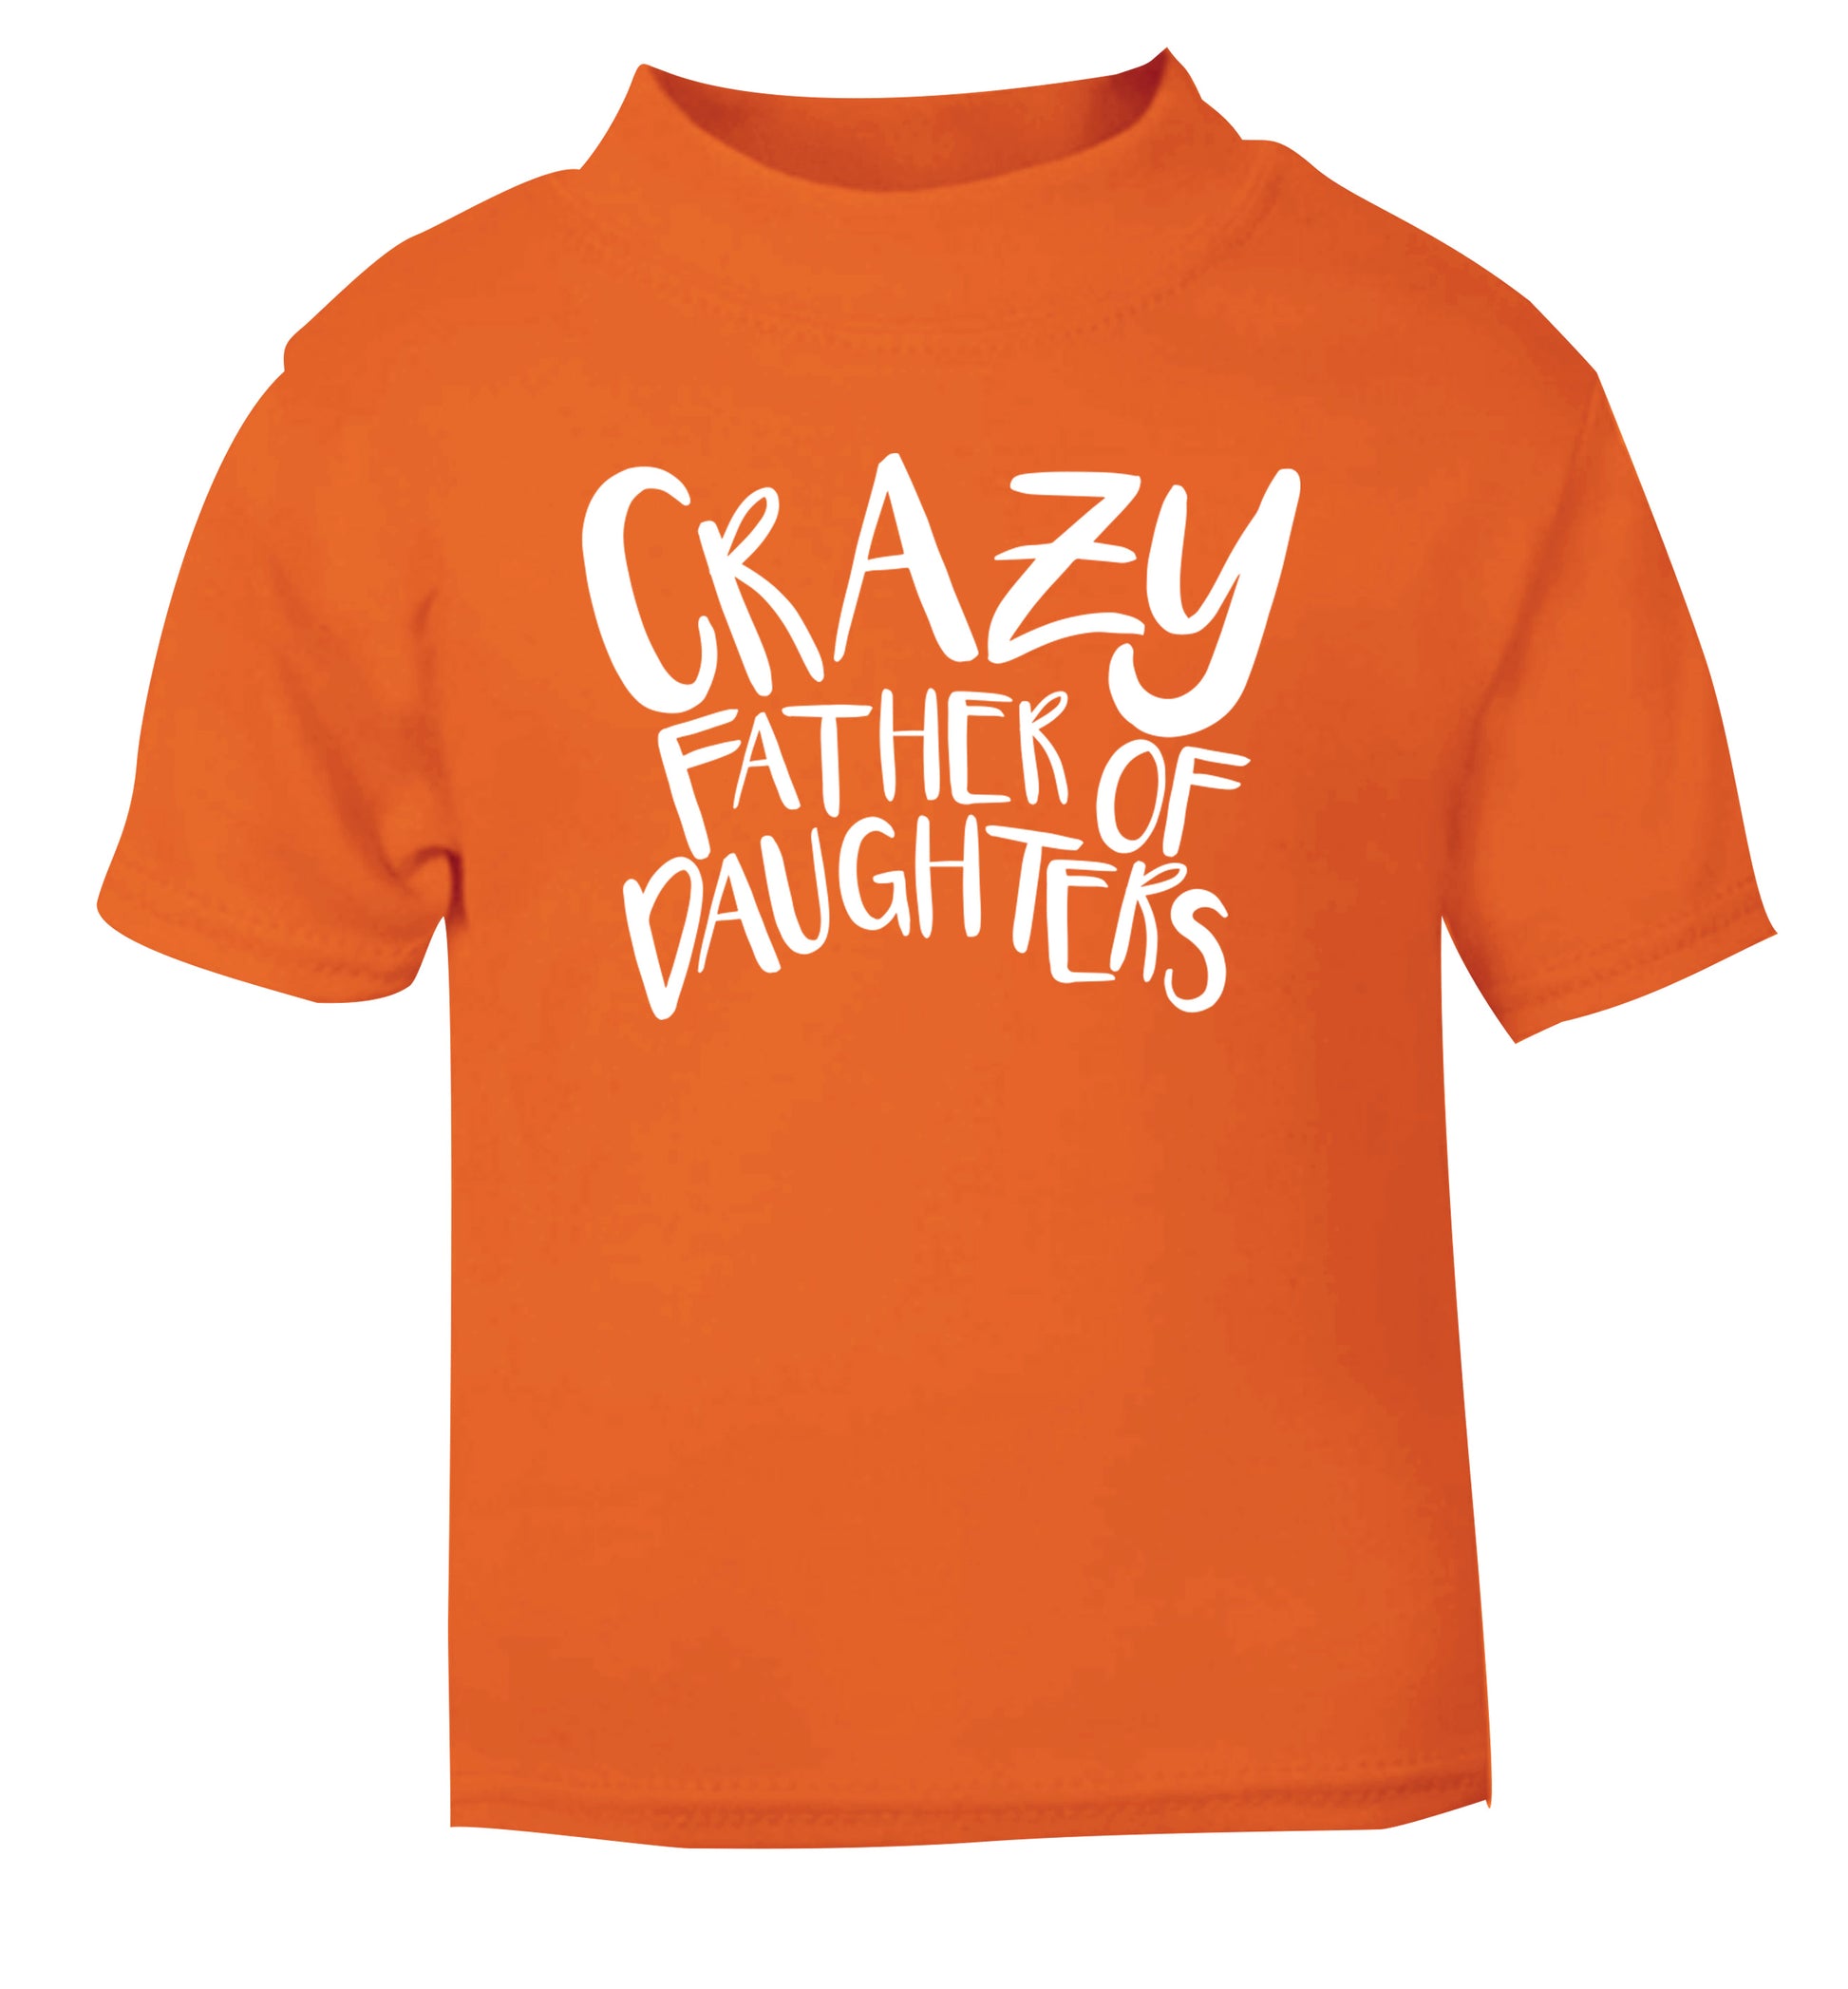 Crazy father of daughters orange Baby Toddler Tshirt 2 Years